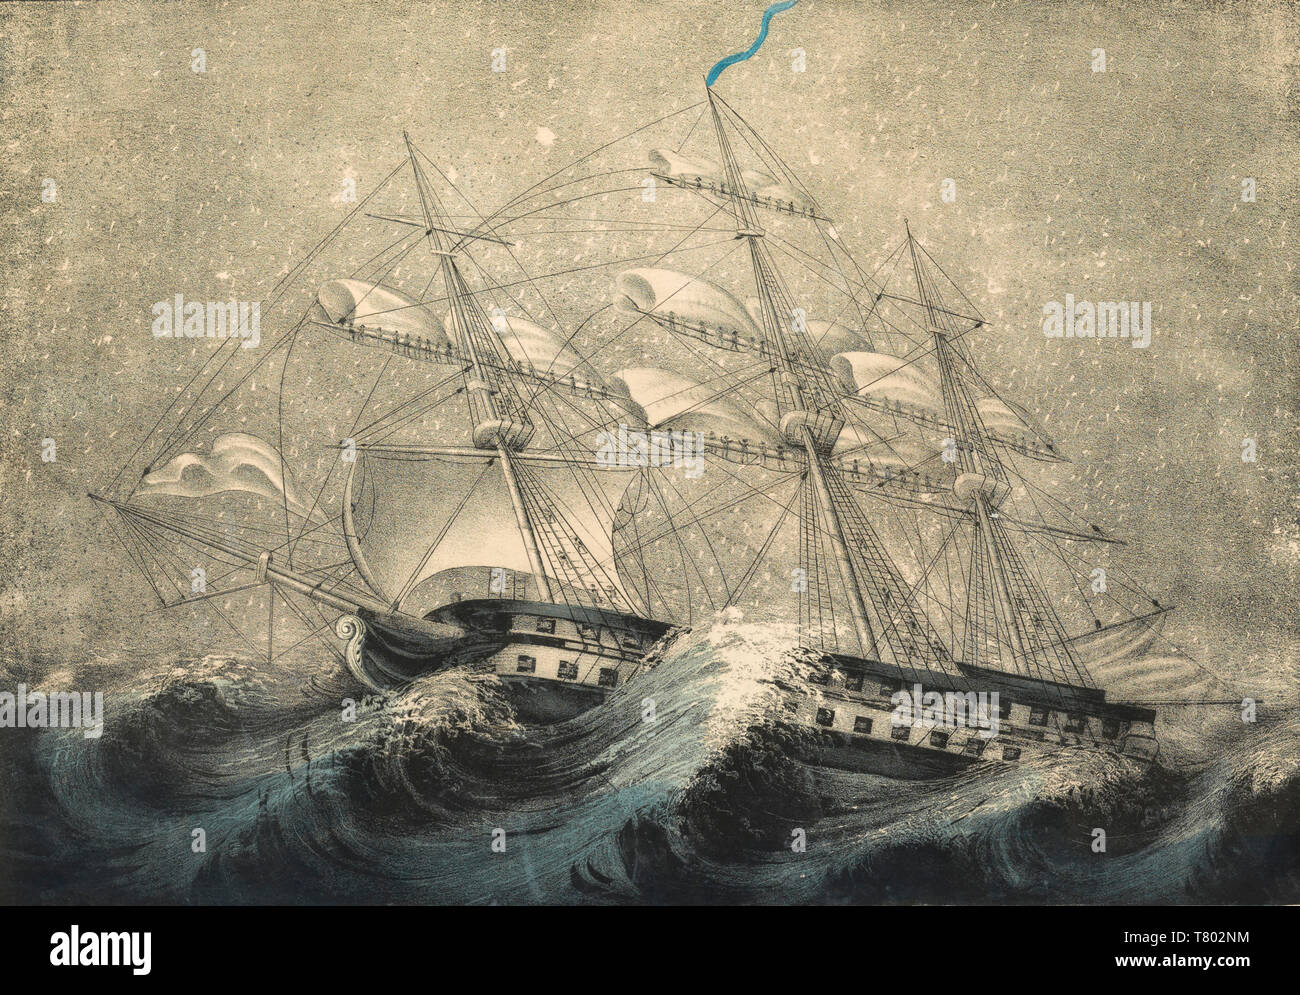 Ship in Squall, 19th Century Stock Photo